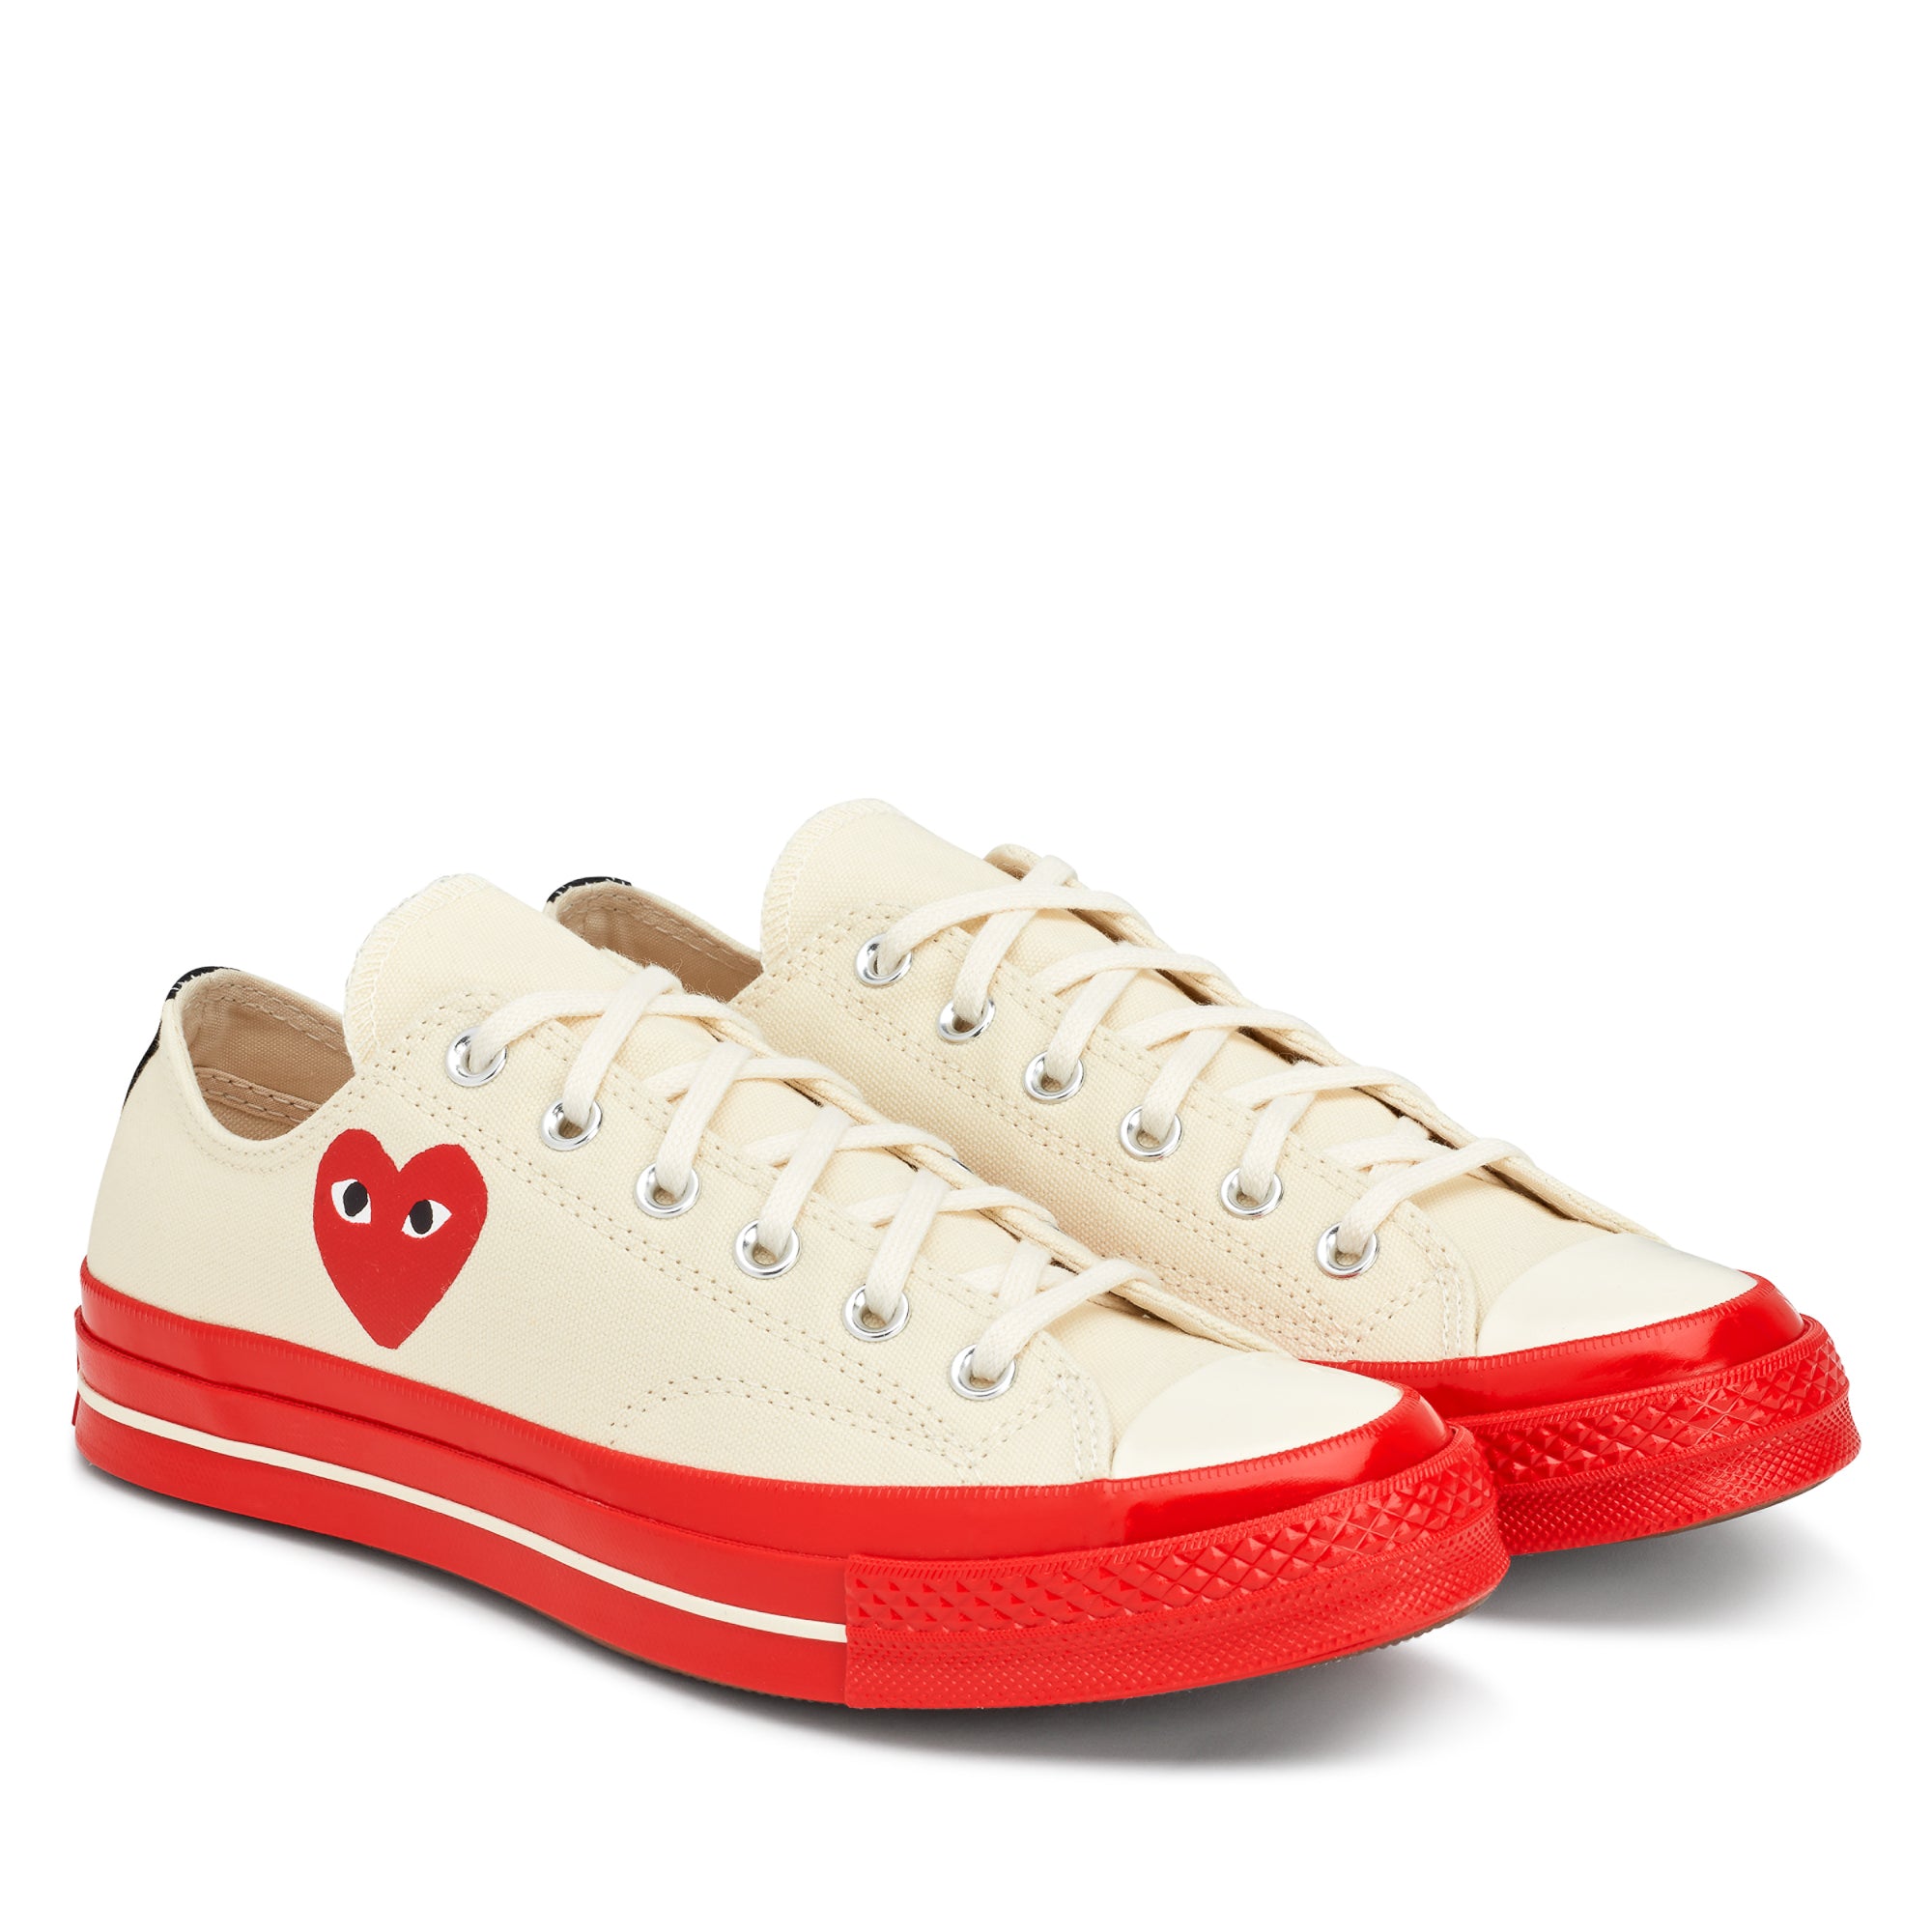 PLAY CONVERSE - Chuck 70 Low Top - (Red/White) view 5